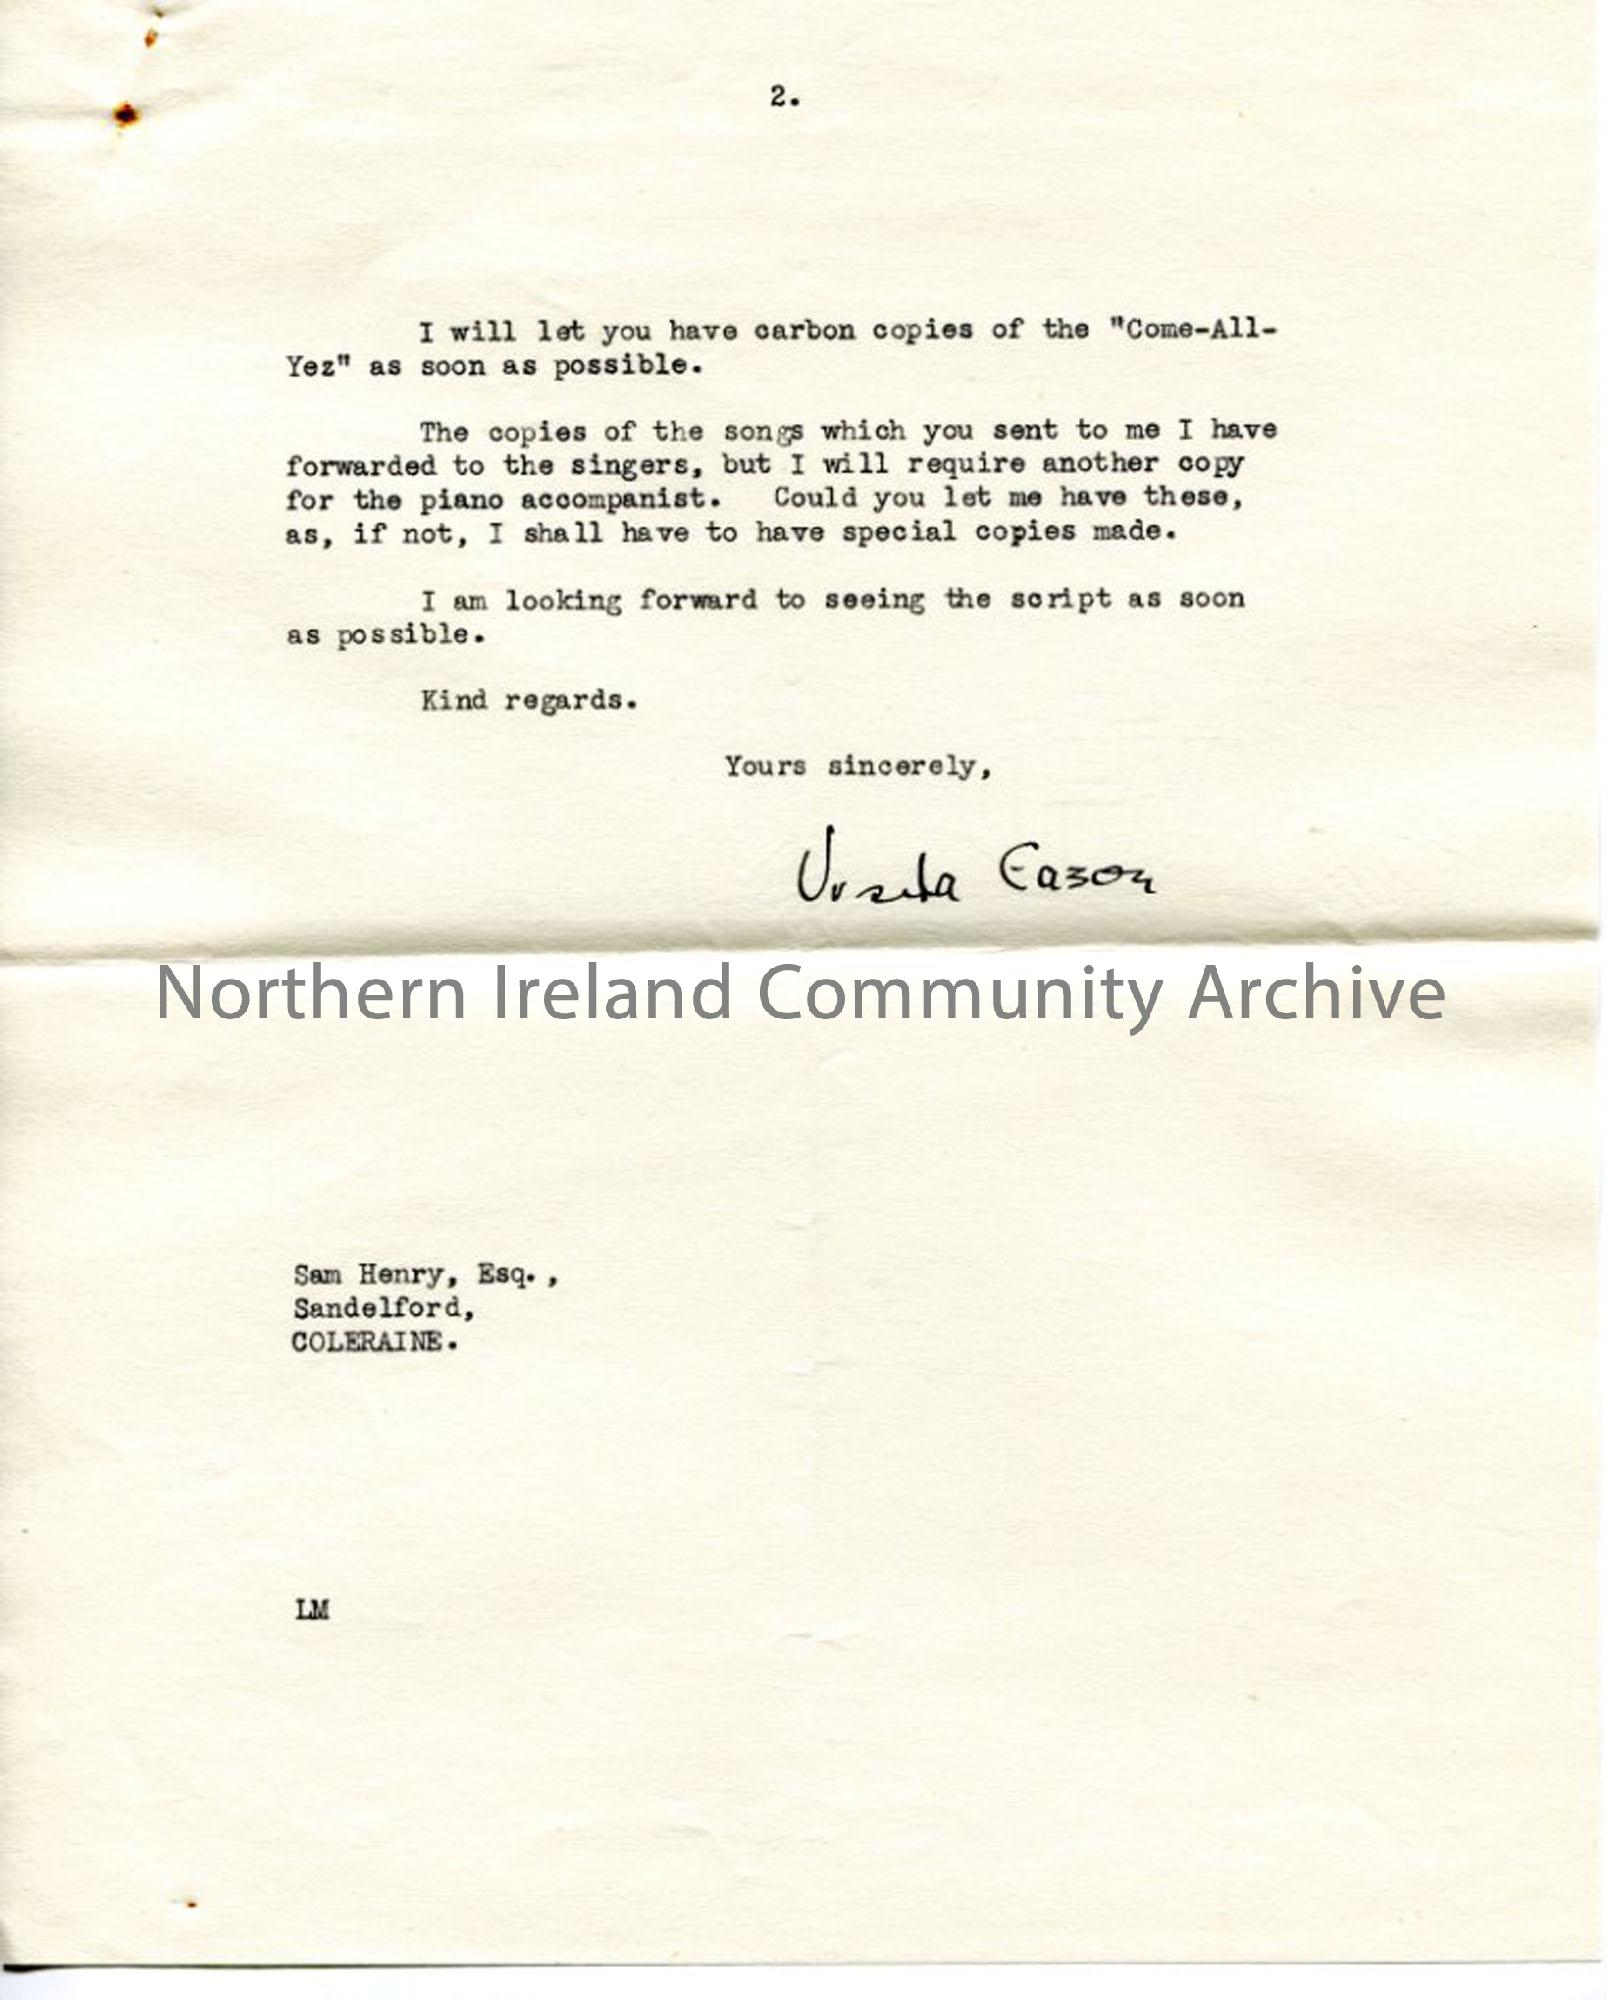 Page 2 of 2 – Letter from Ursula Eason of the BBC, dated 3.5.1941